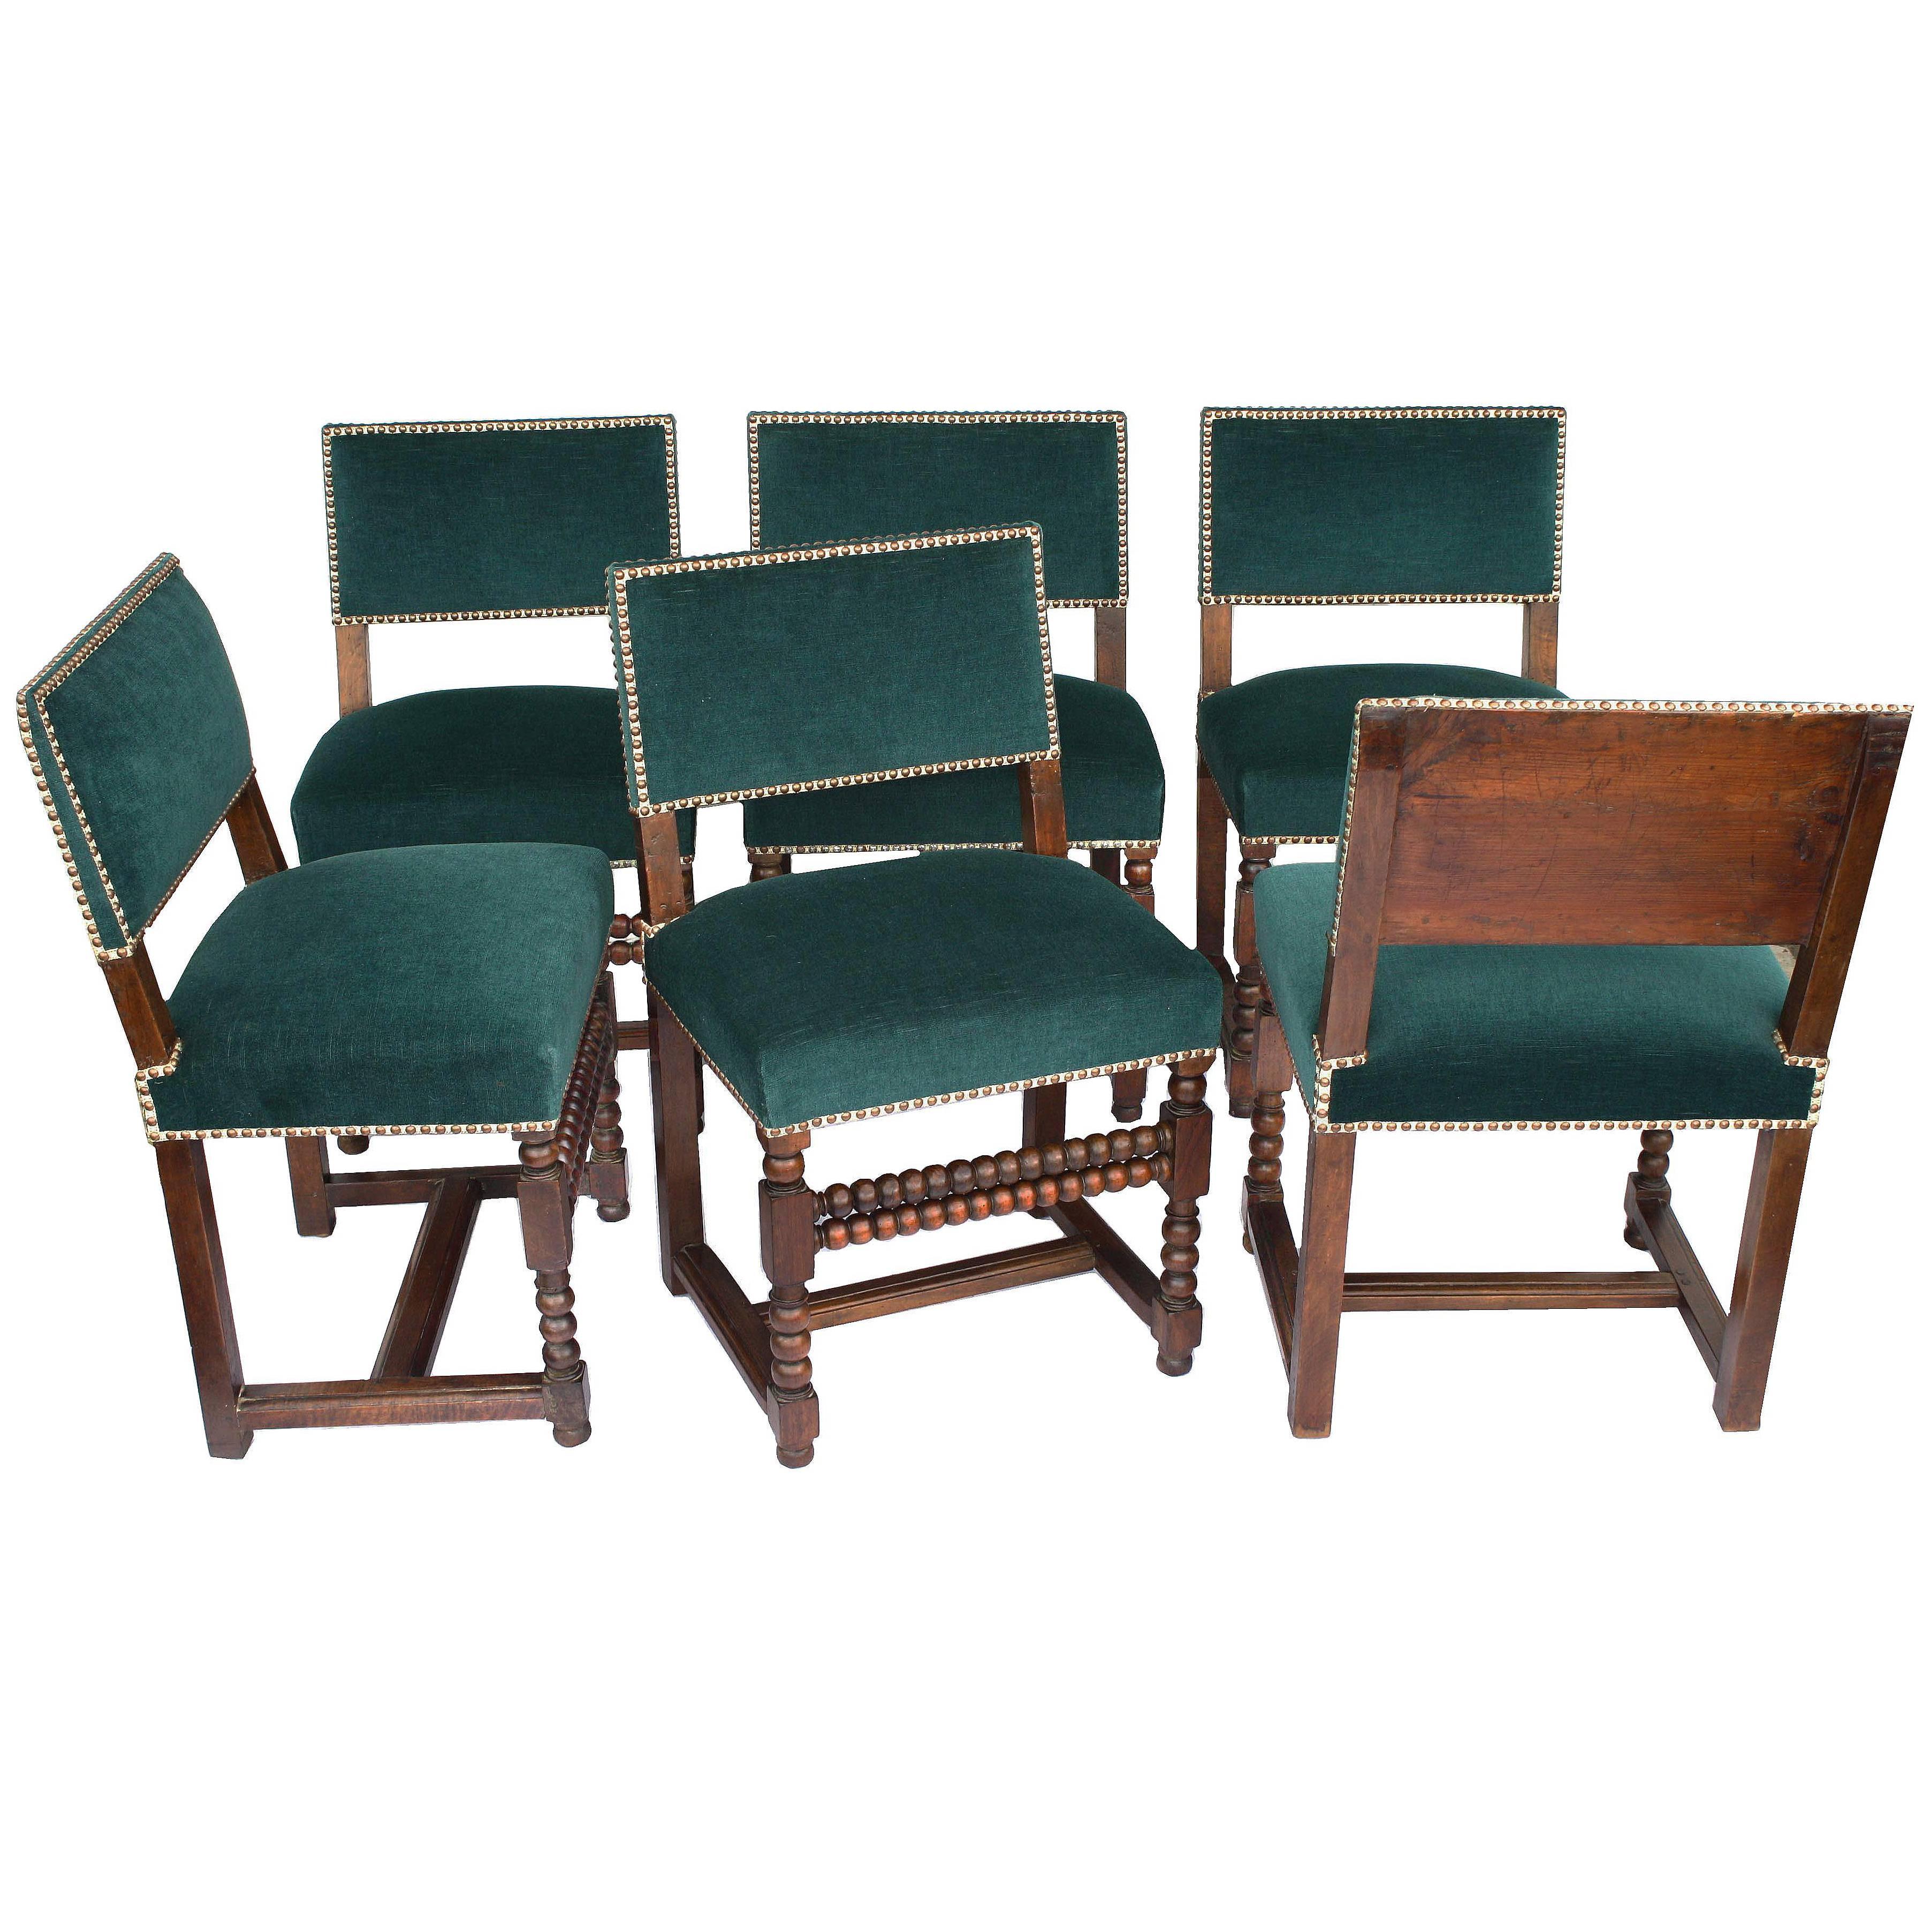 SIX Louis XIII Dining Chairs For Sale